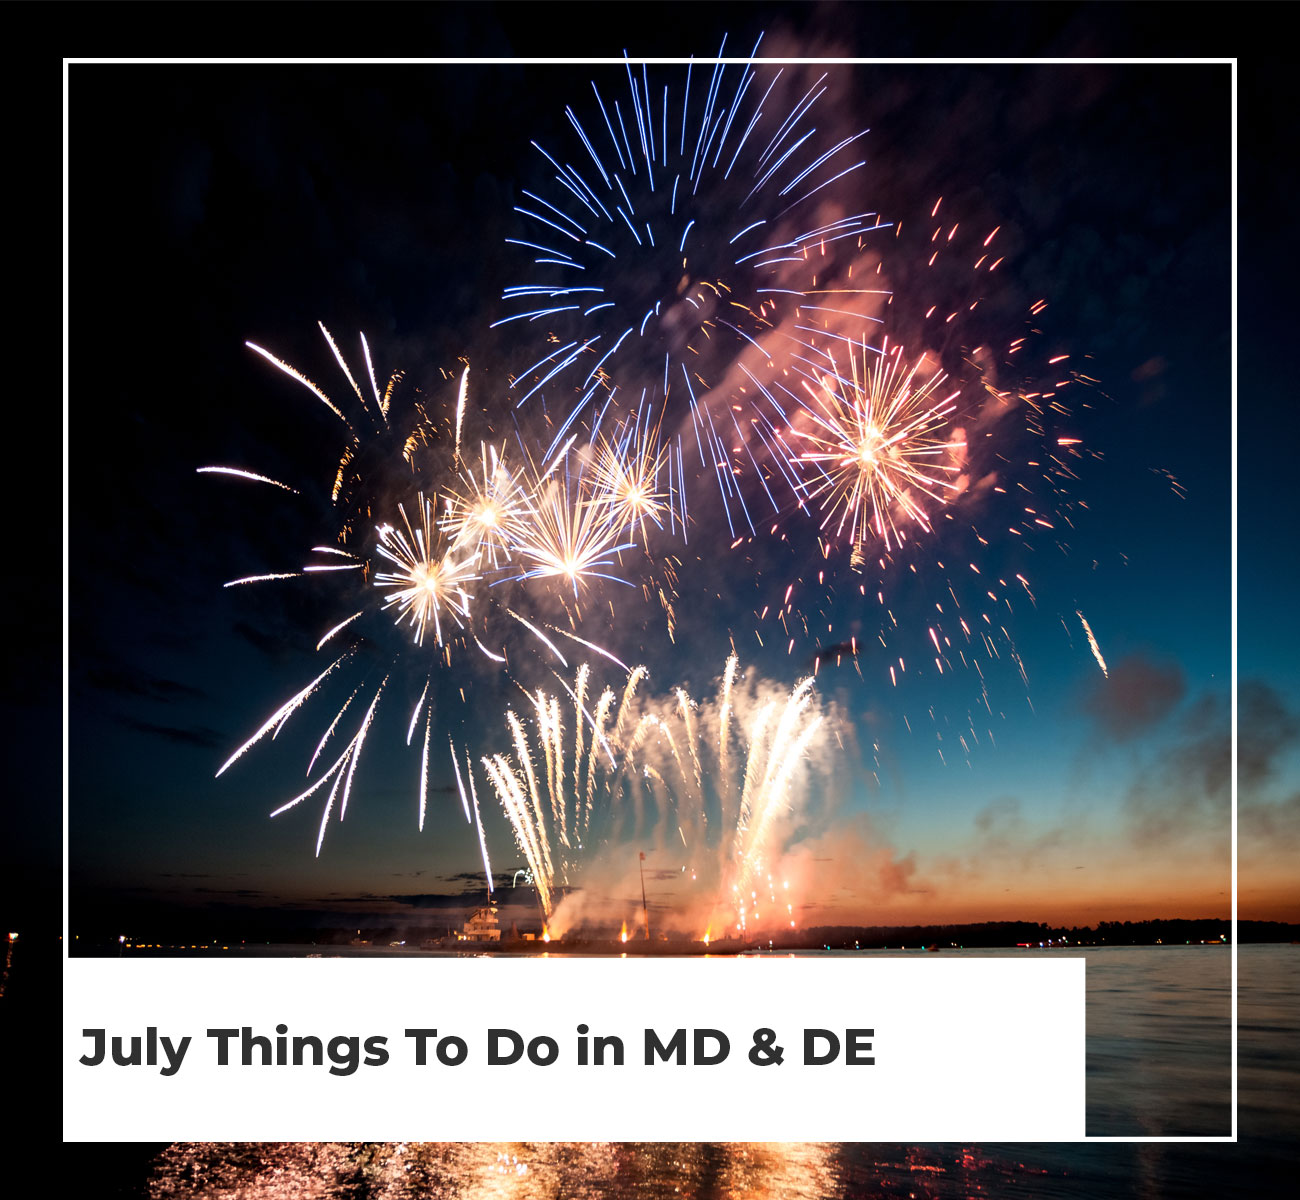 July Things To Do MD and DE